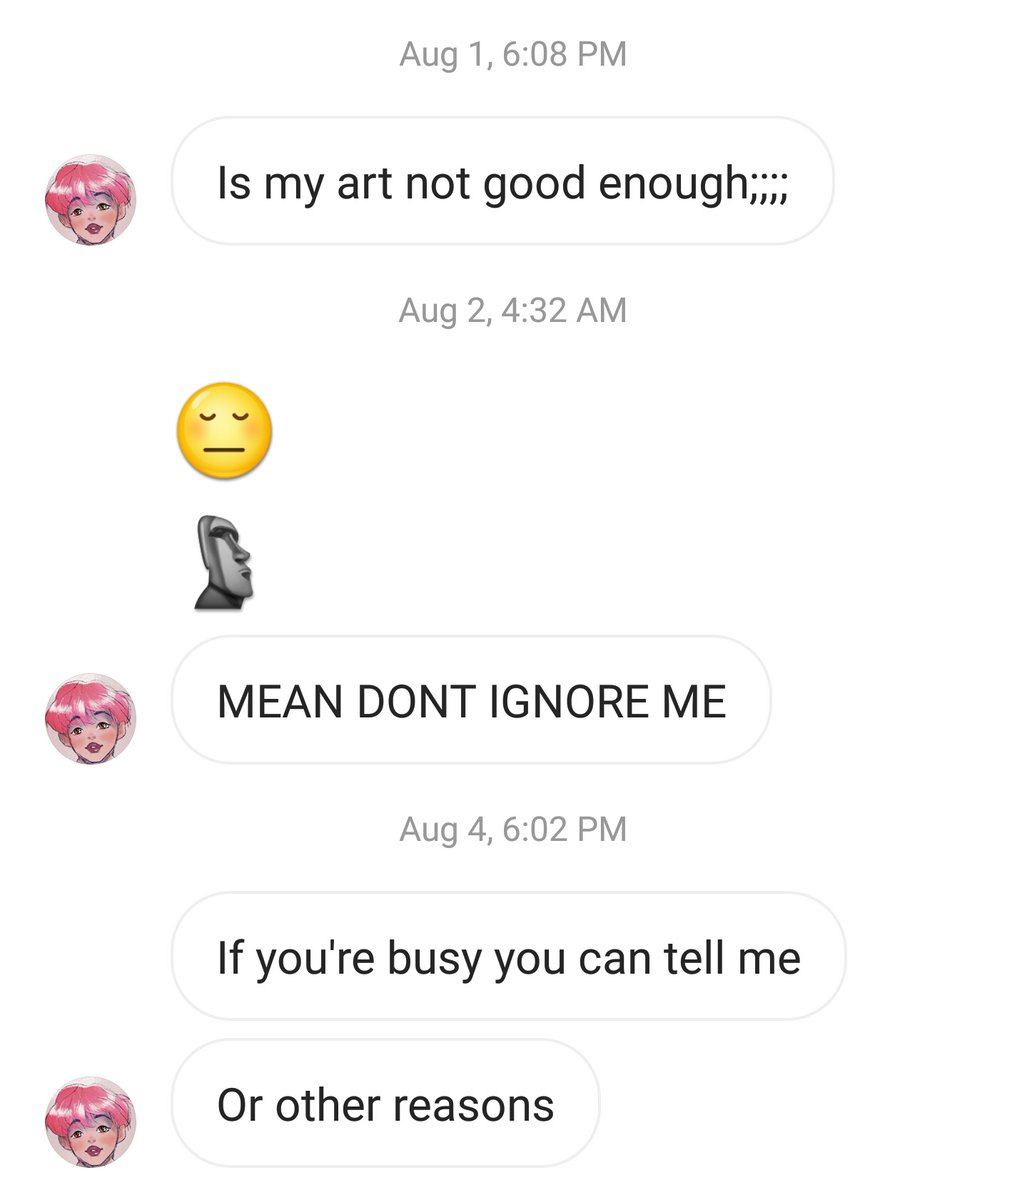 this happened just after. i had my notifs off bc i was dealing with college applications, but i felt bad that i didnt tell her i was busy beforehand